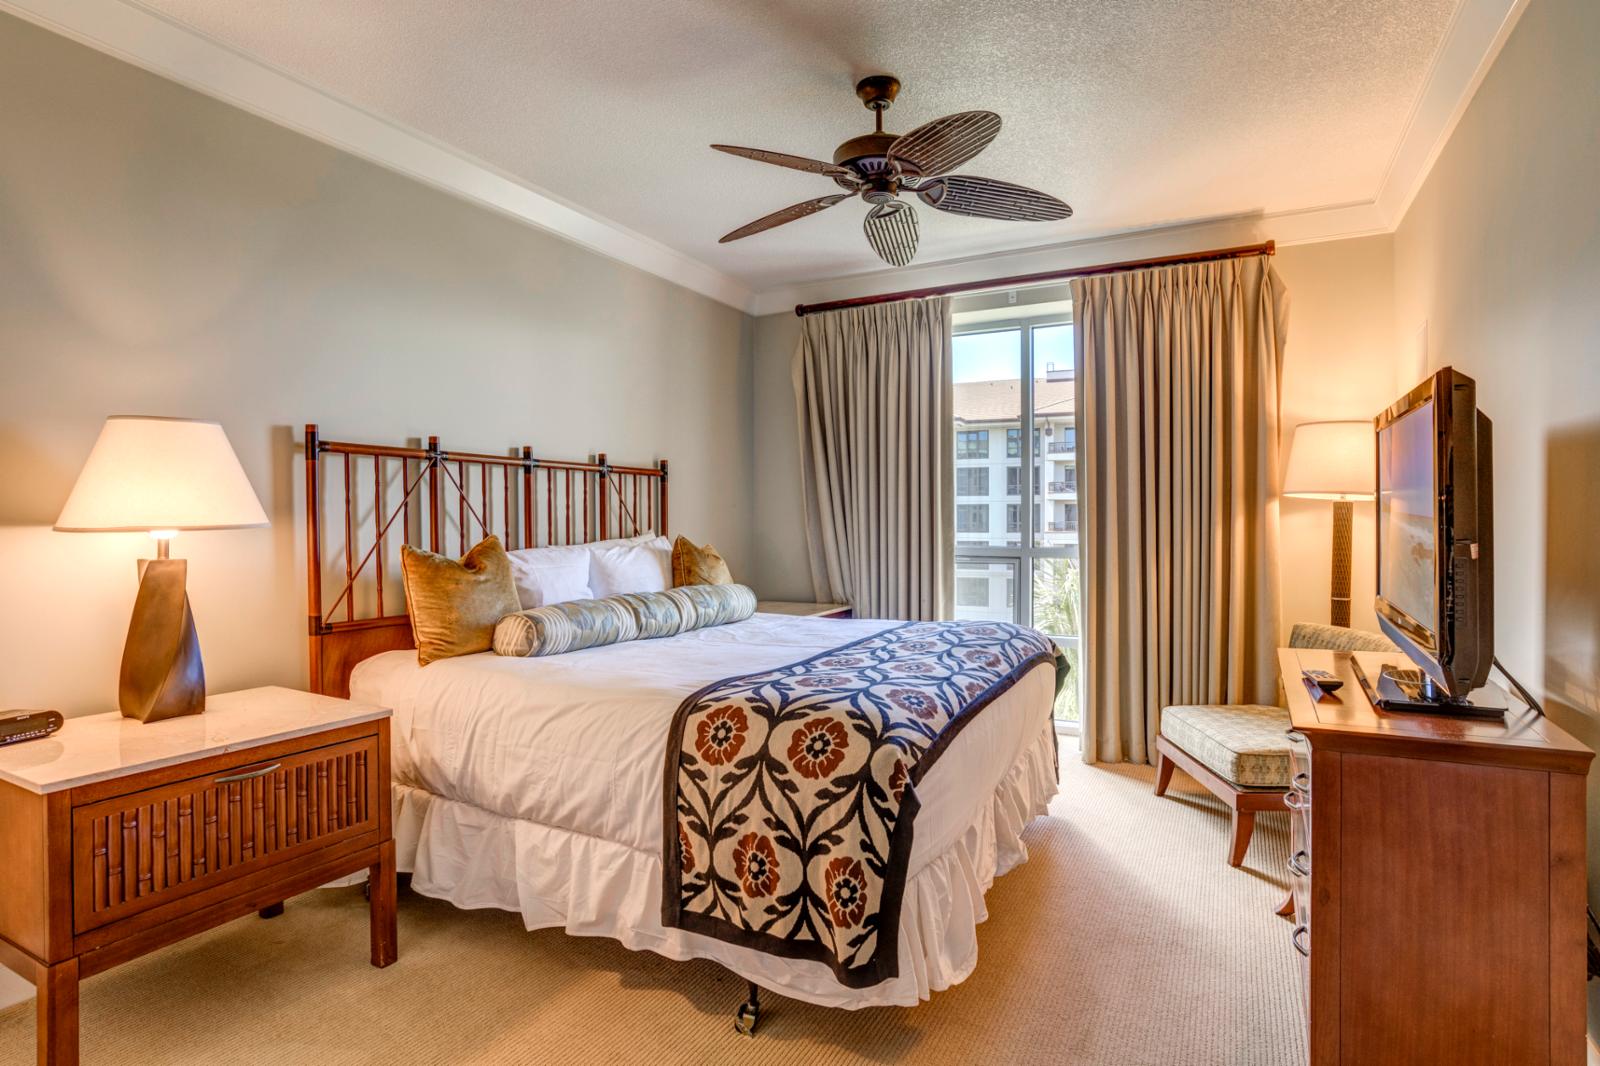 Large comfortable layout, this guest suite has it all!